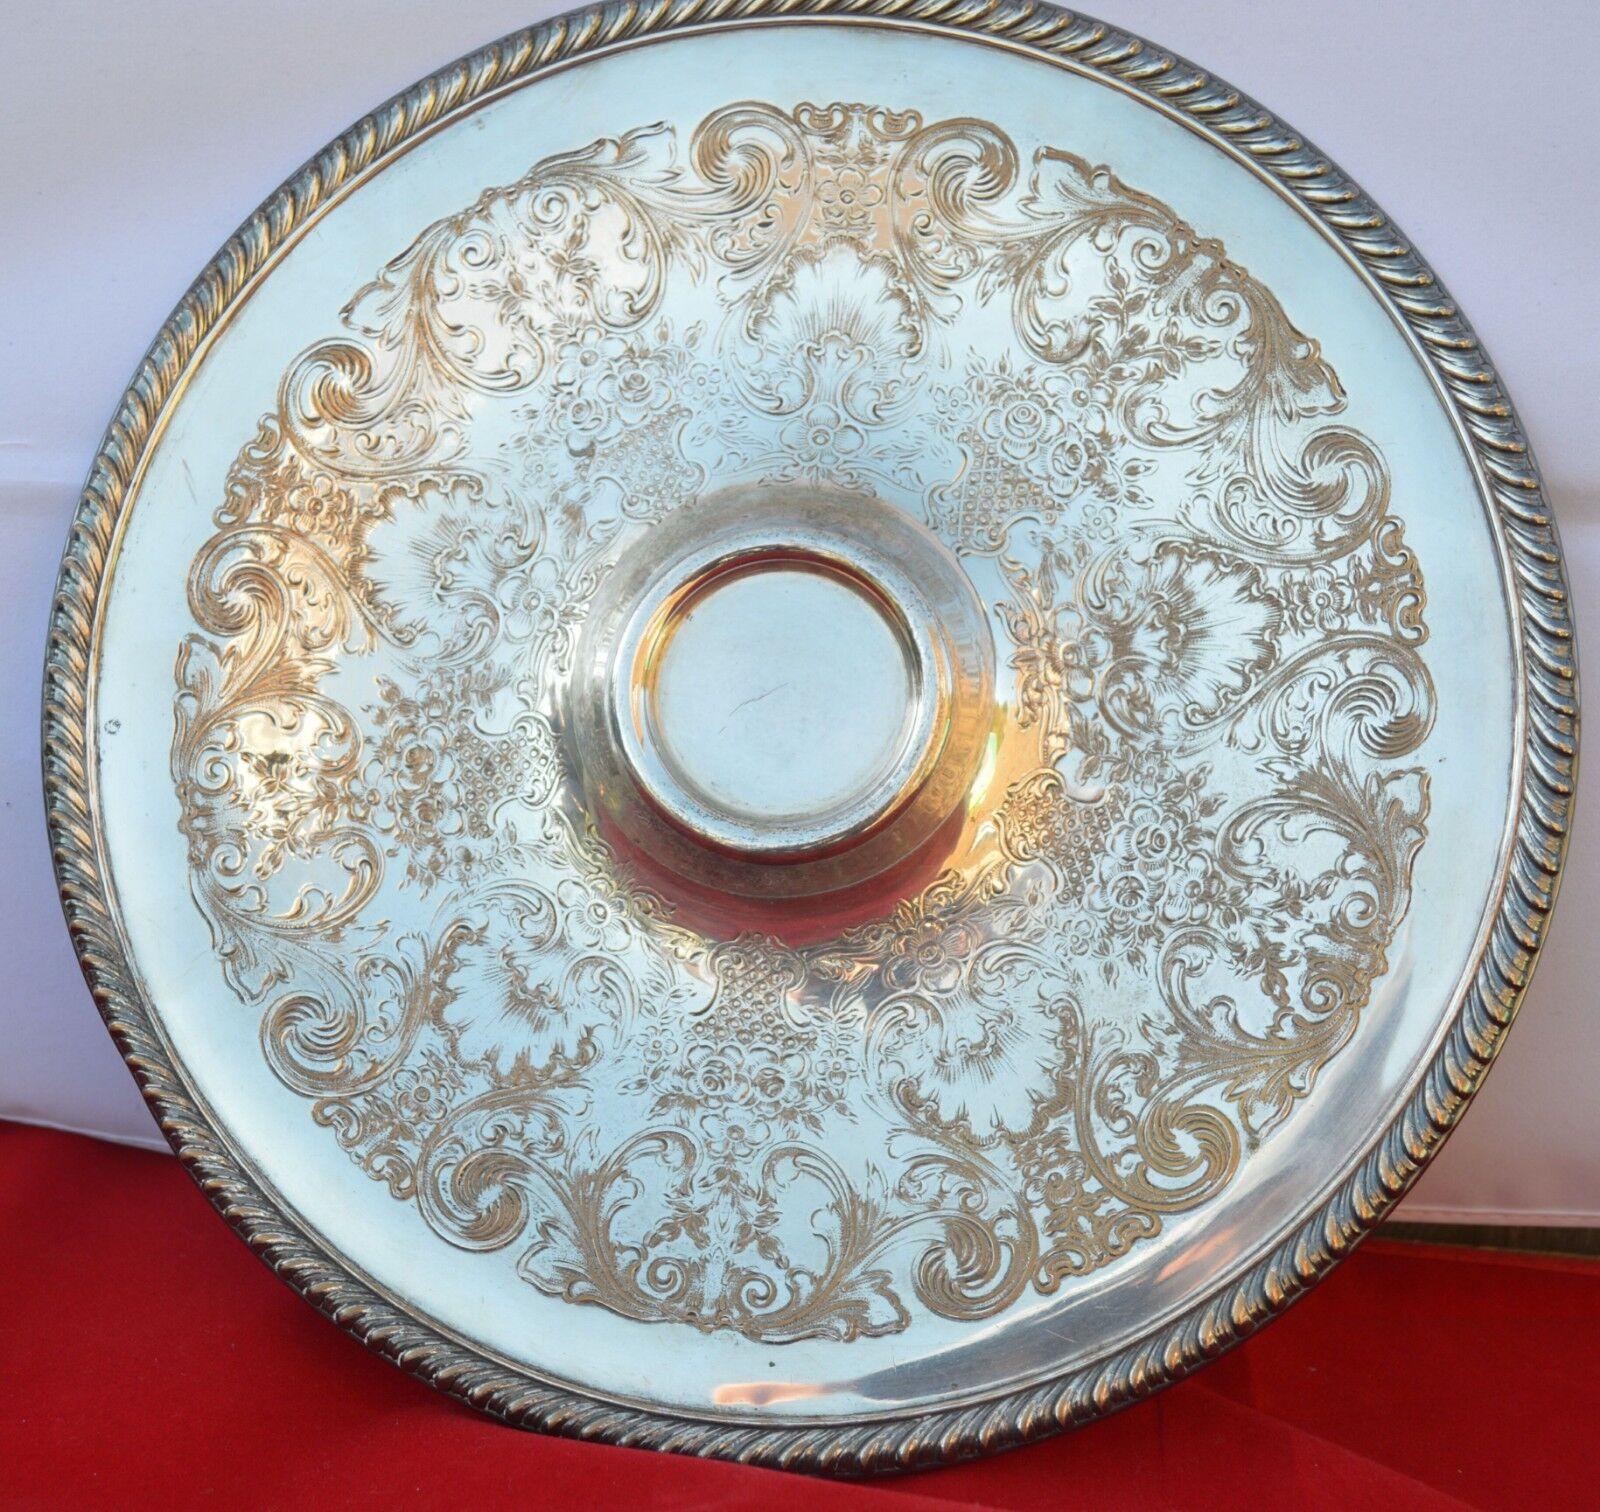 VINTAGE WM ROGERS 866 SILVER-PLATE ETCHED PATTERN SERVING TRAY - TMD167207